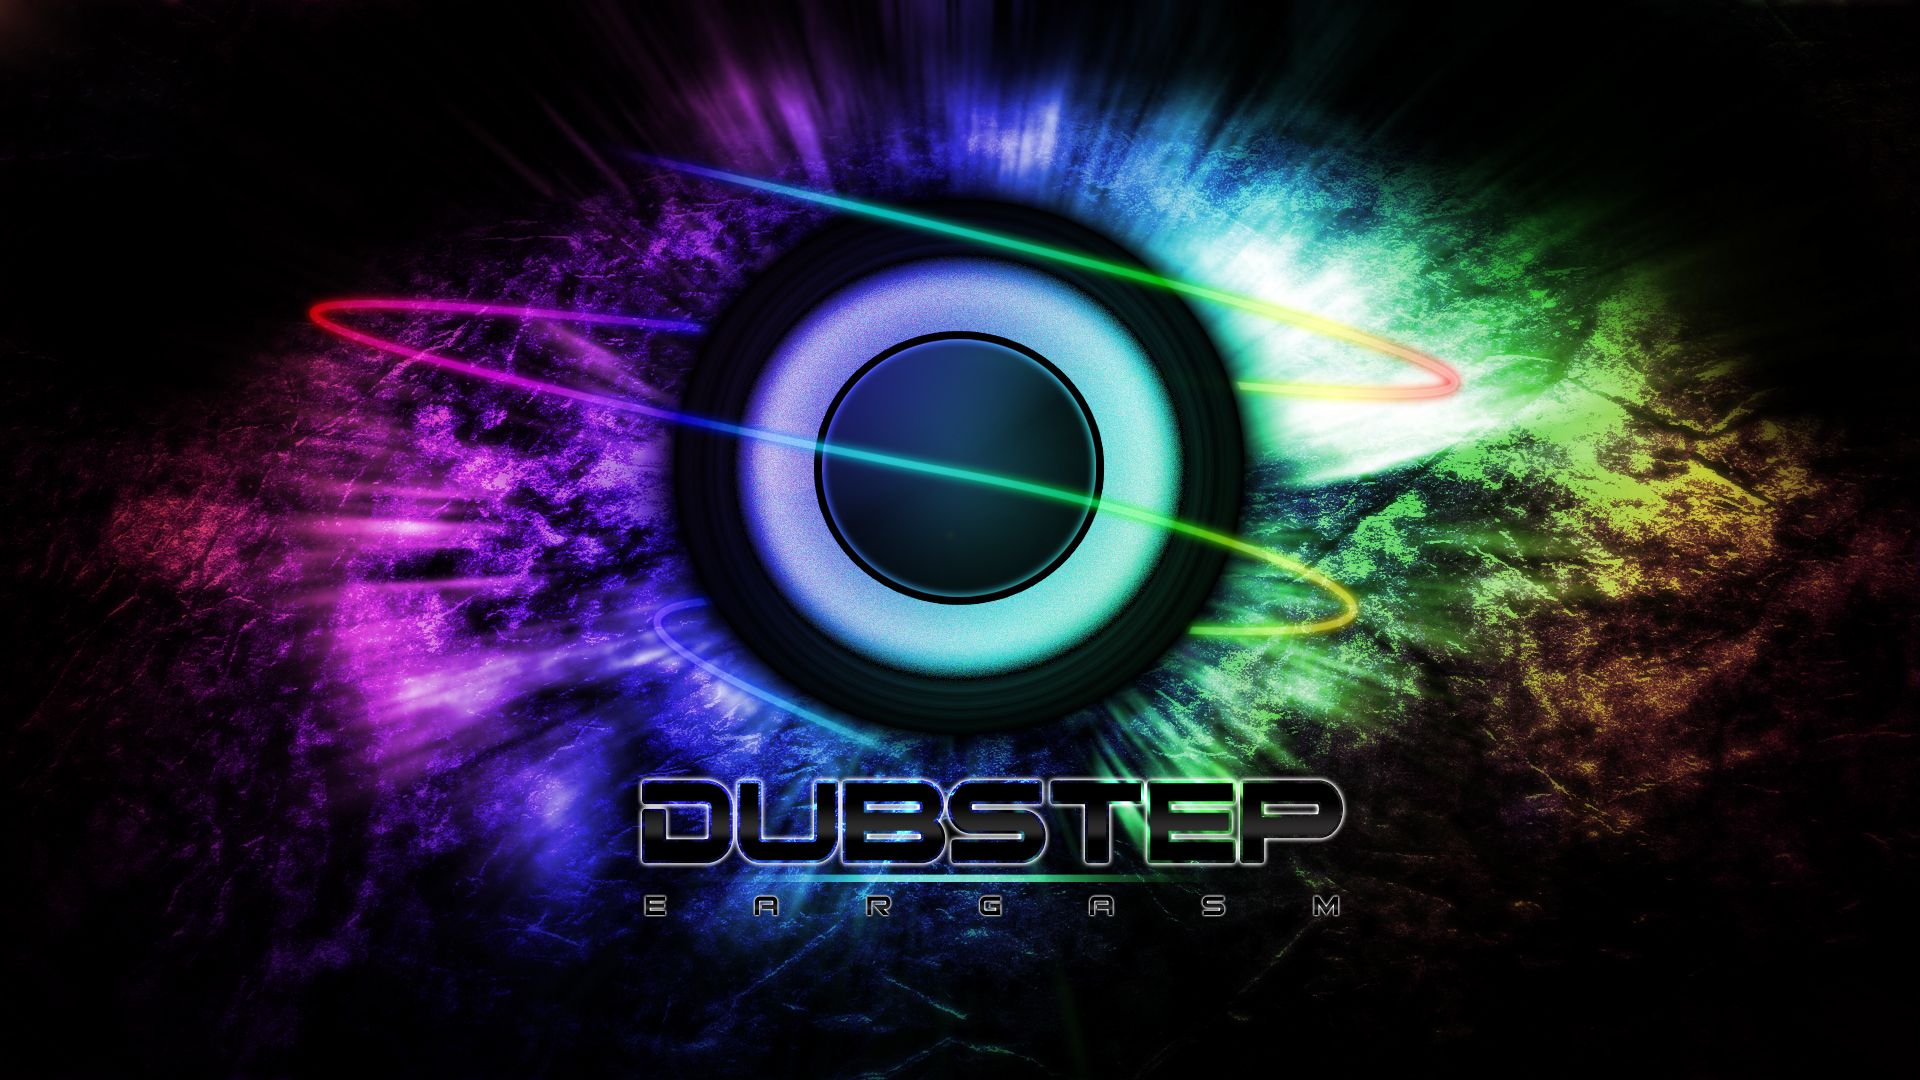 3d Background In High Quality Awesome Dubstep By Jim